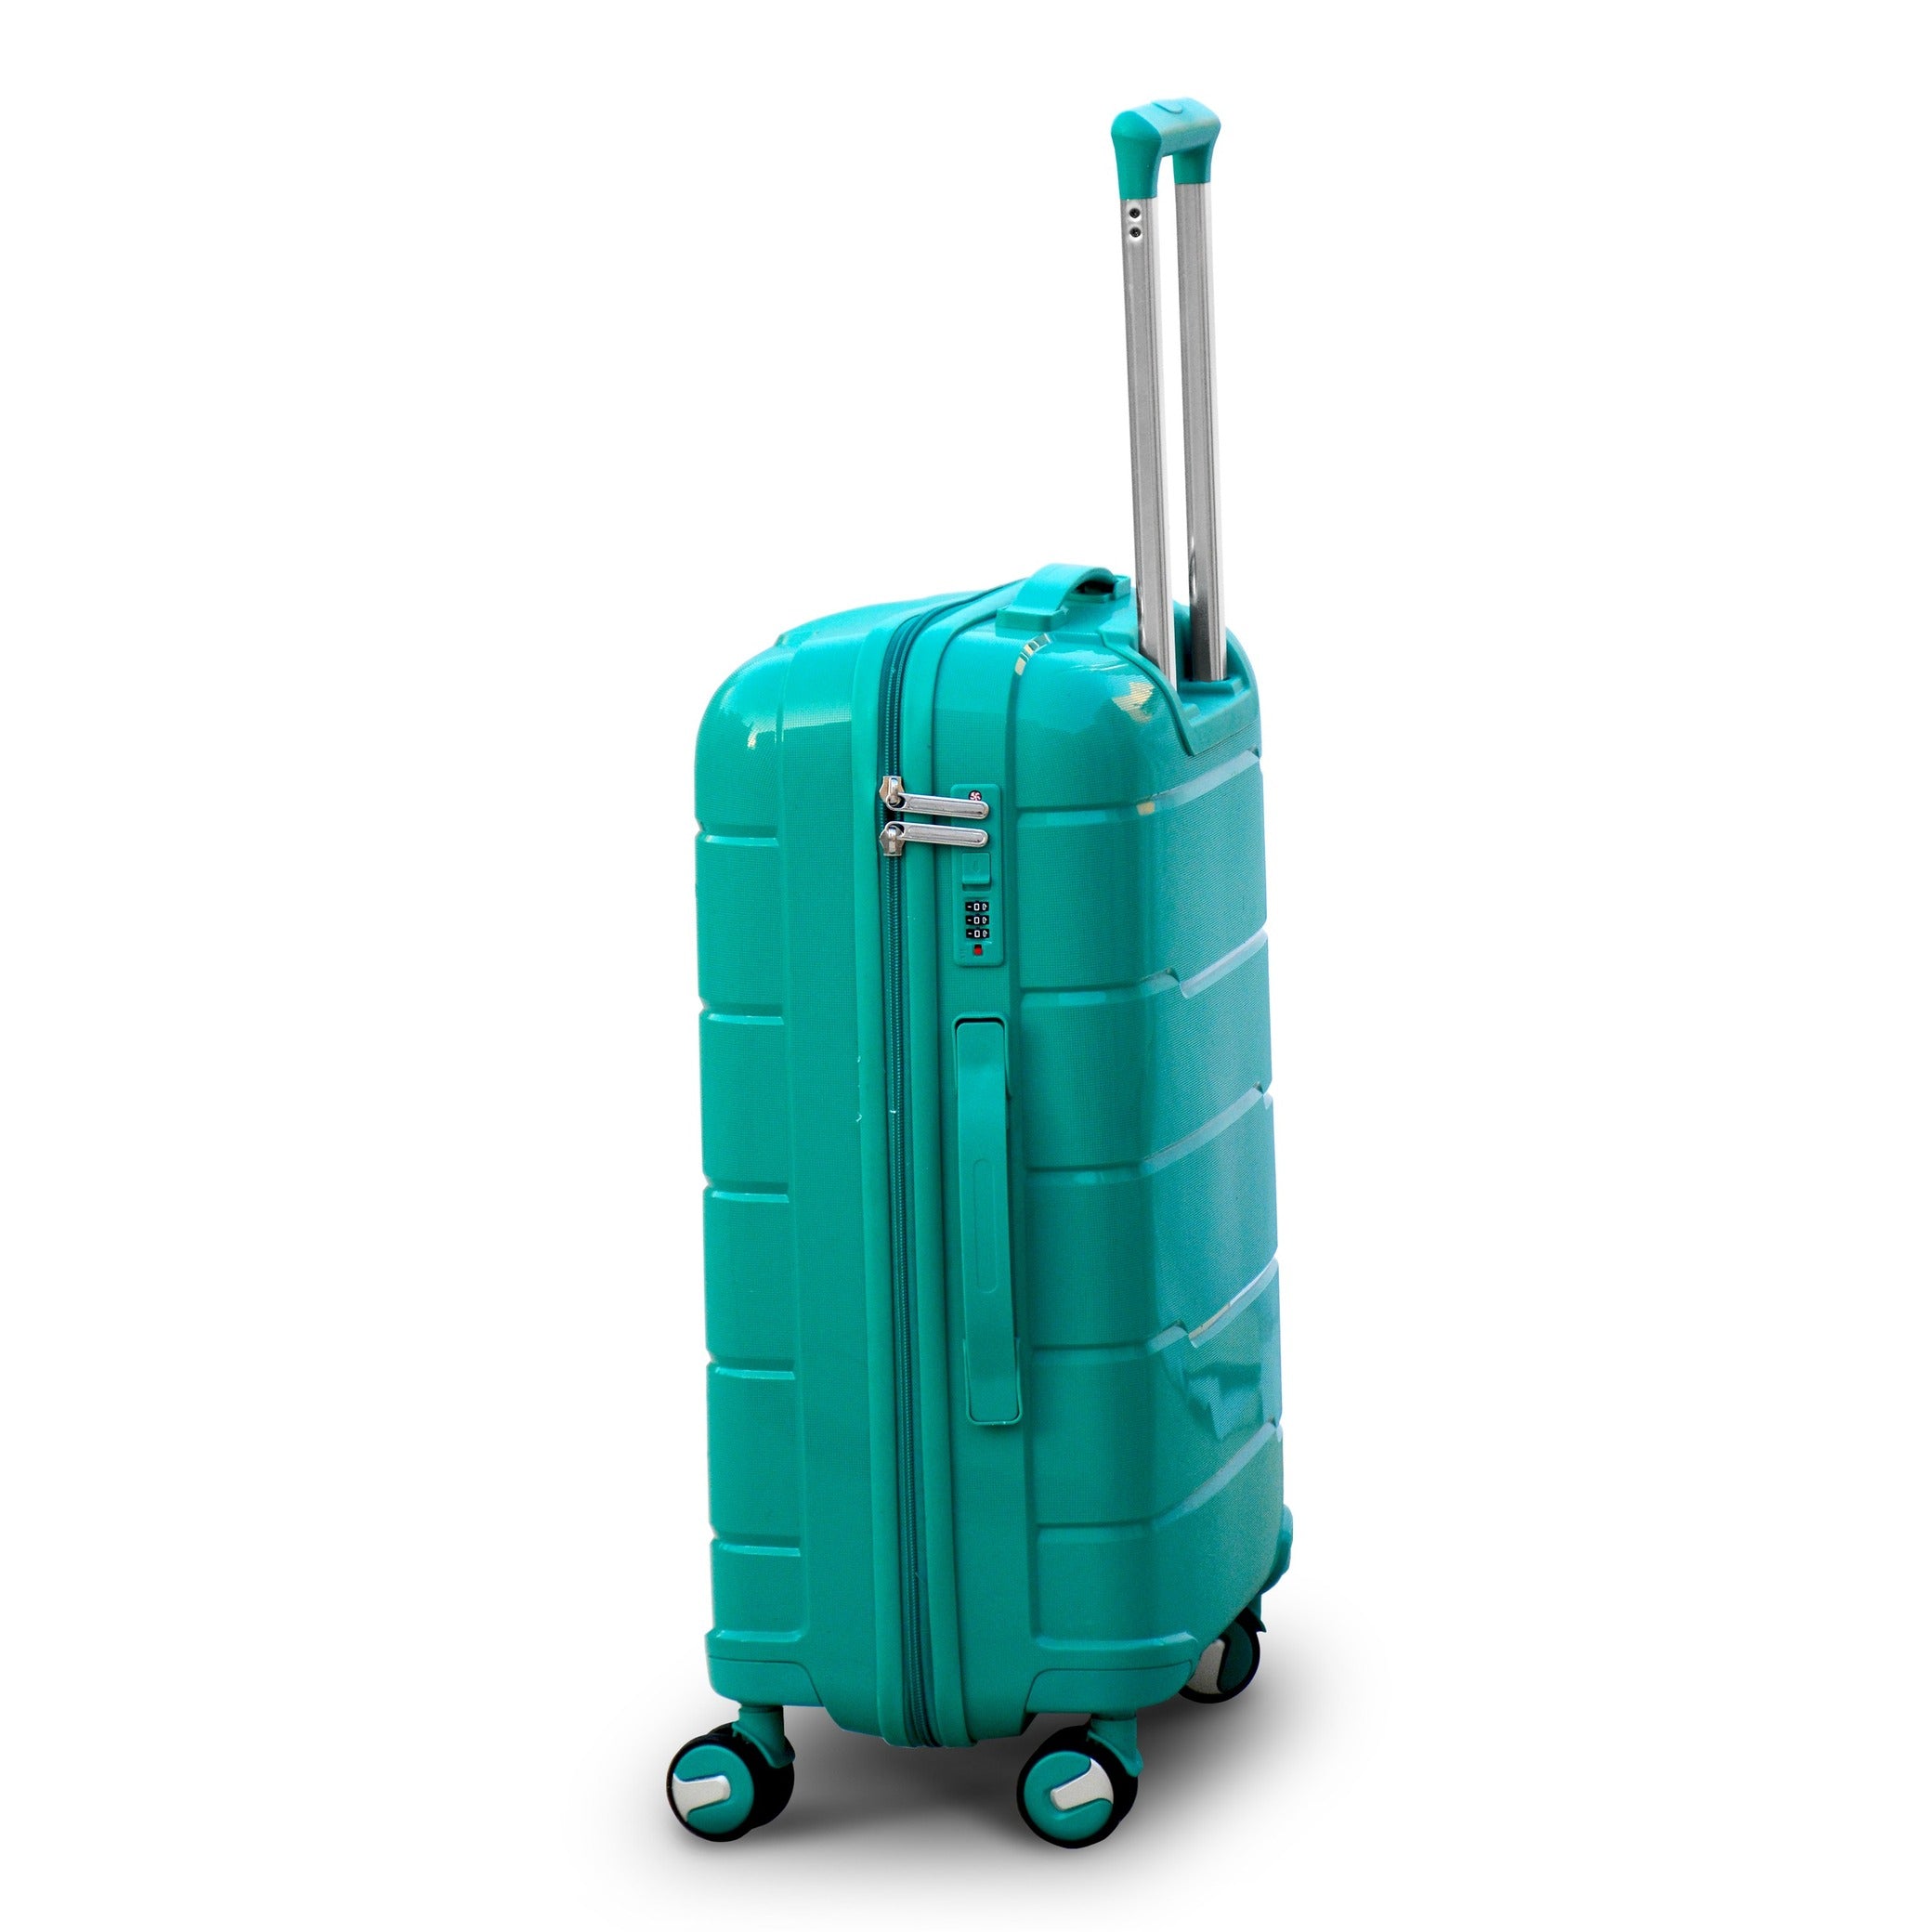 24" Green Colour Non Expandable Ceramic PP Luggage Lightweight Hard Case Trolley Bag with Double Spinner Wheel